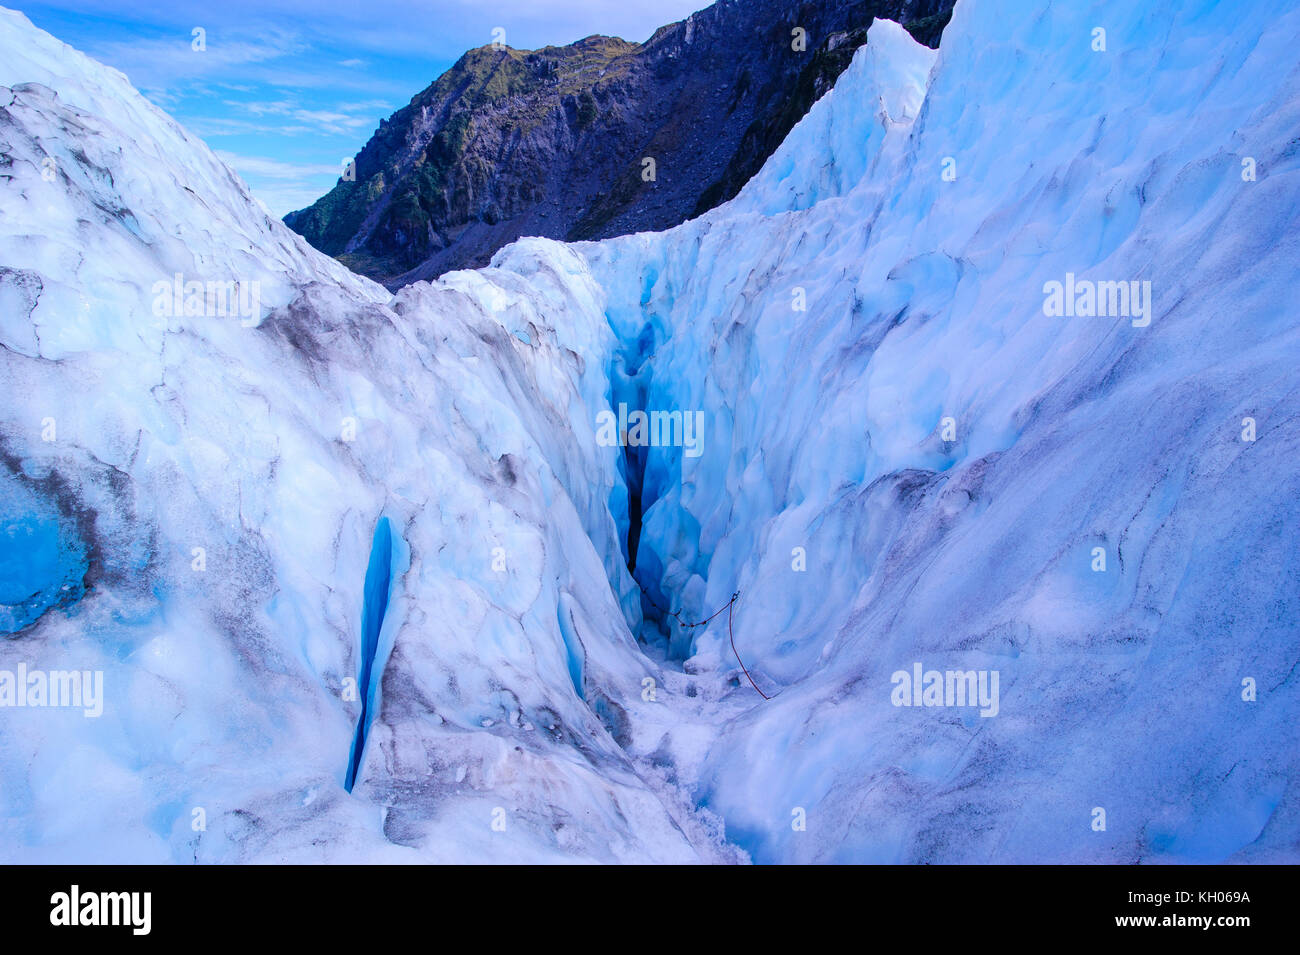 Entrance to an ice cave, Fox Glacier, South Island, New Zealand Stock Photo